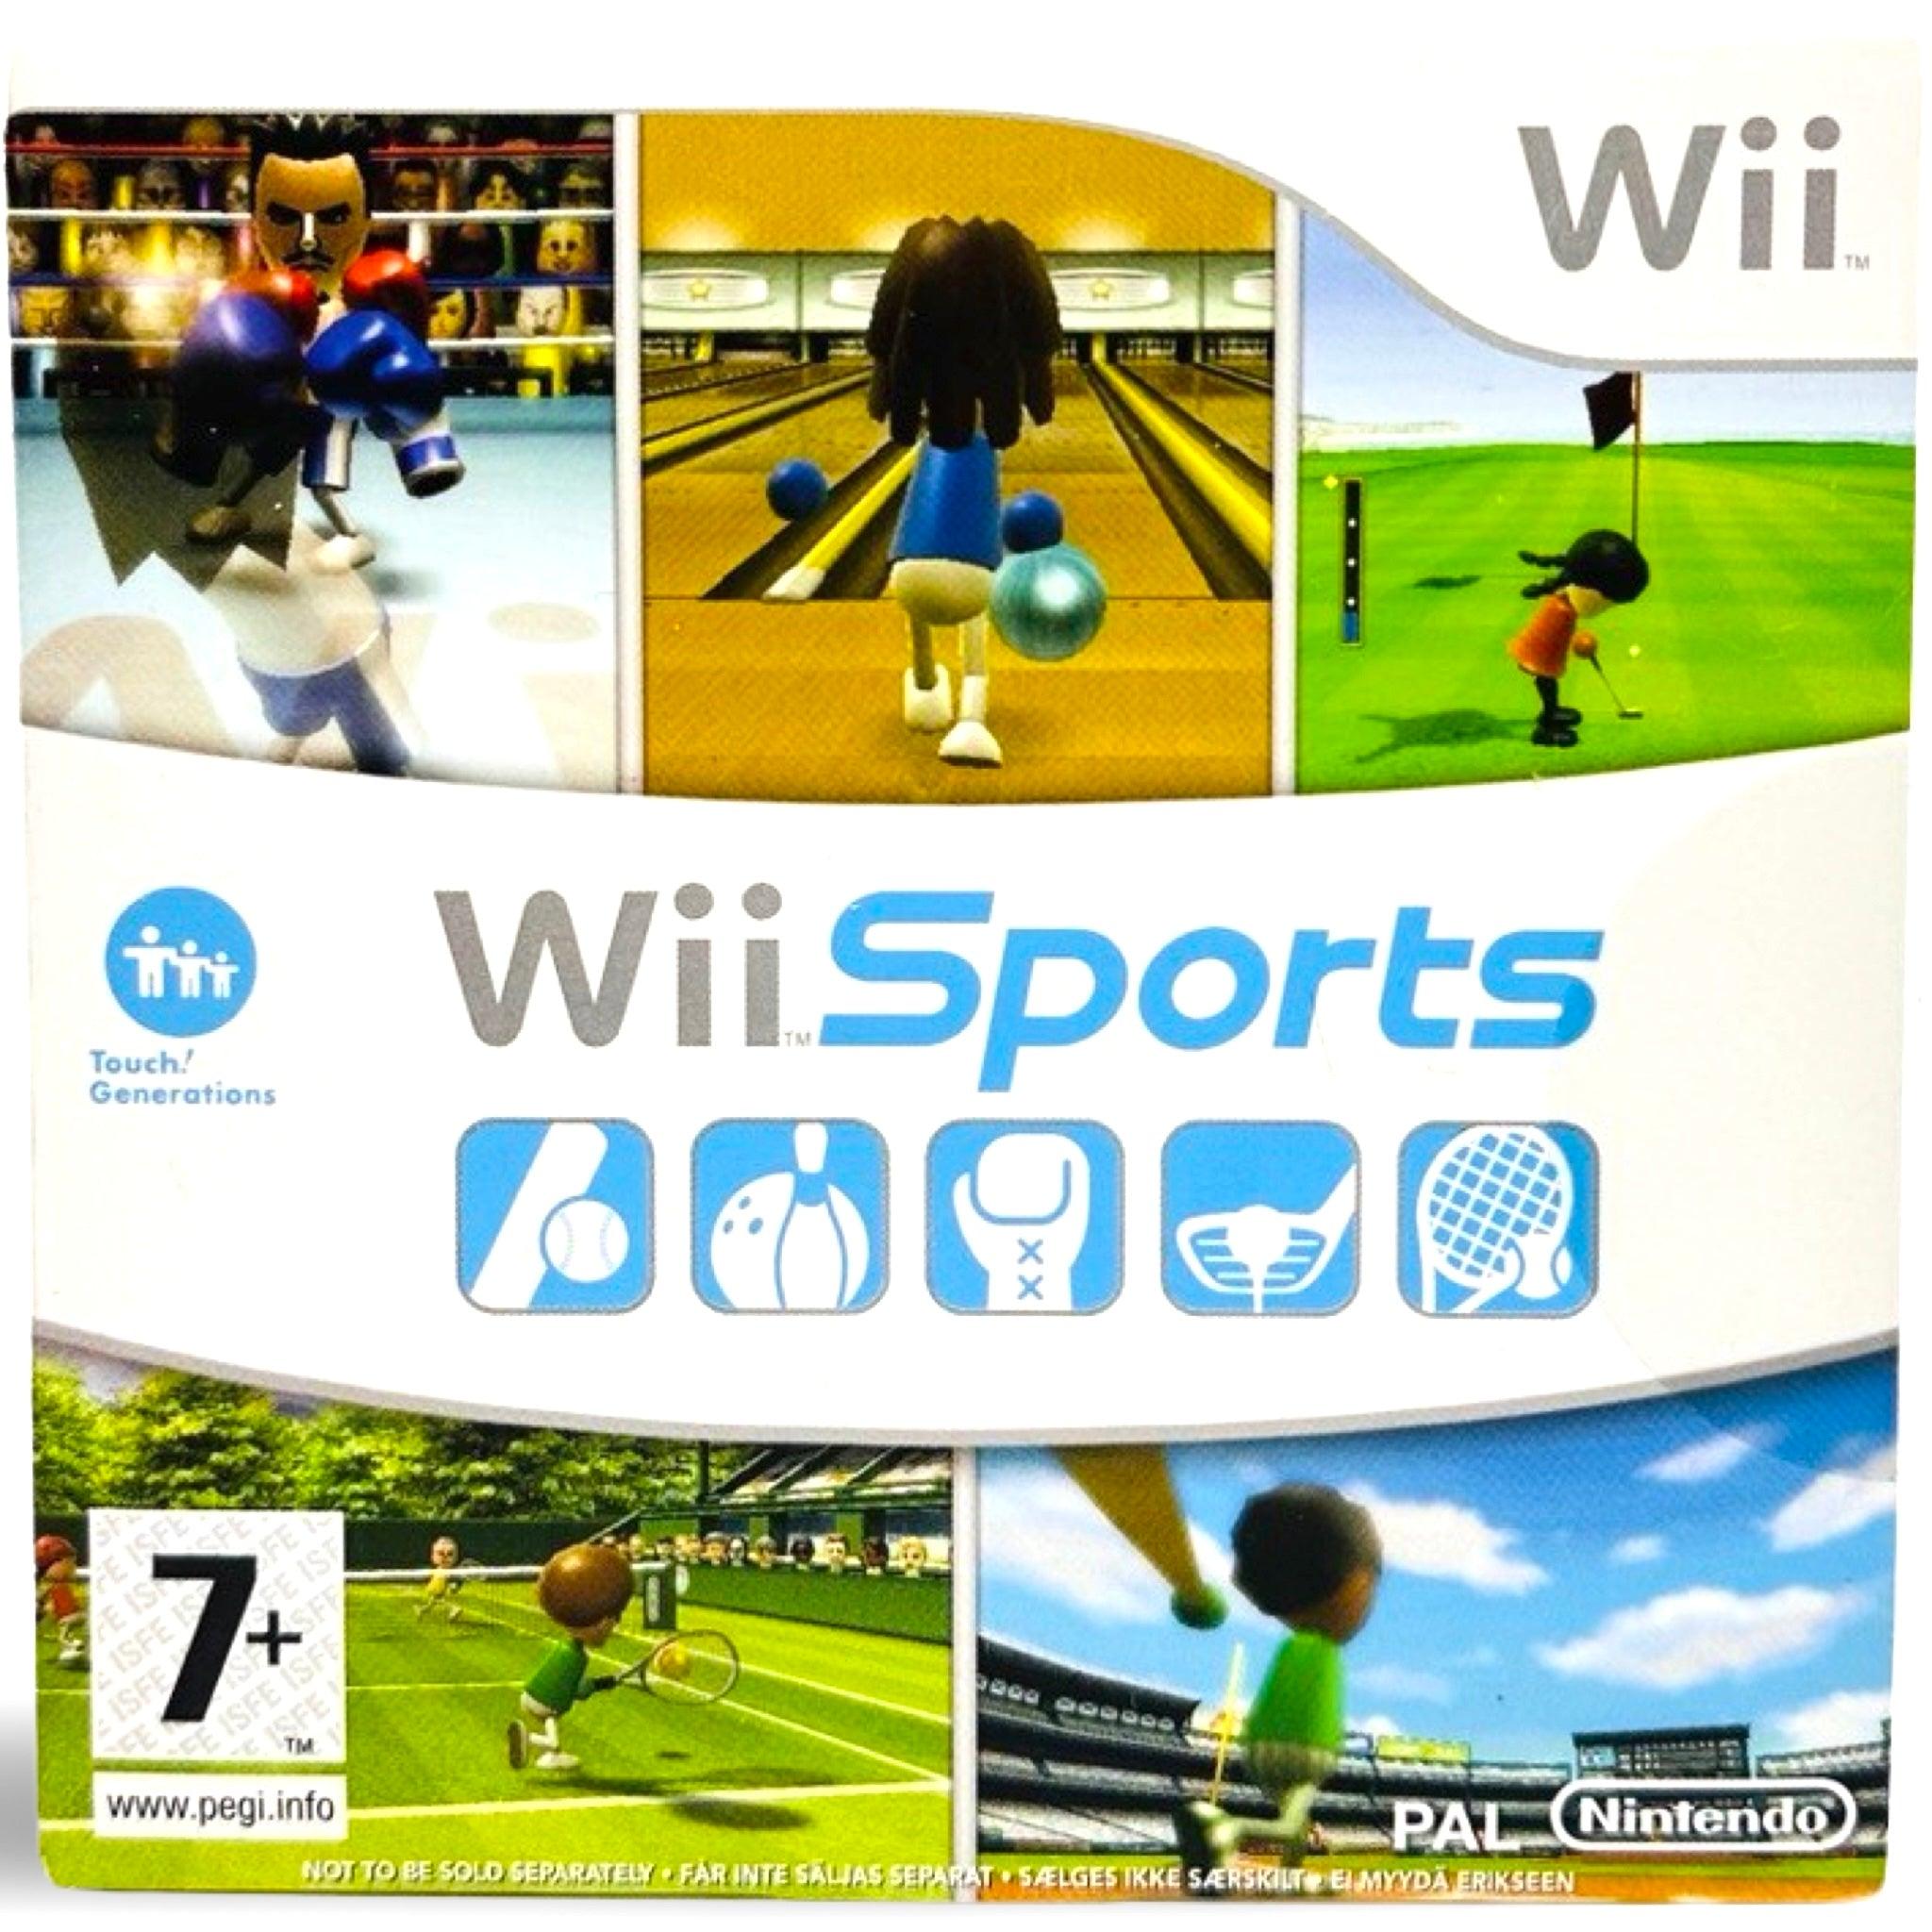 Wii: Wii Sports (i papp cover) - RetroGaming.no